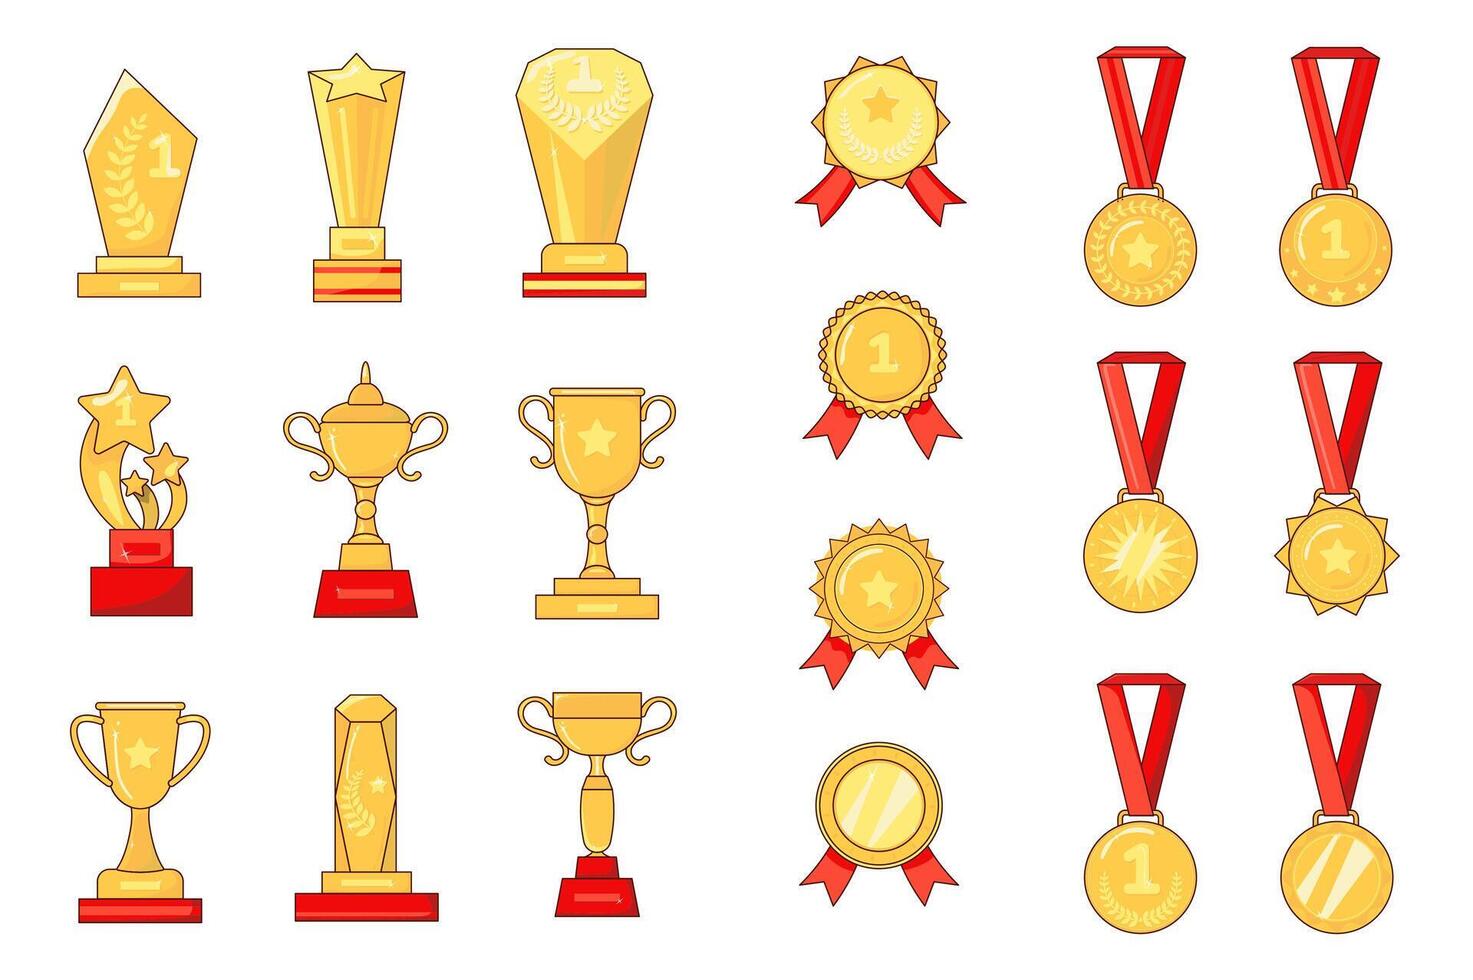 Awards set graphic elements in flat design. Bundle of gold cups, reward badges and medals with red ribbons for awarding winners and champions with first places. Vector illustration isolated objects